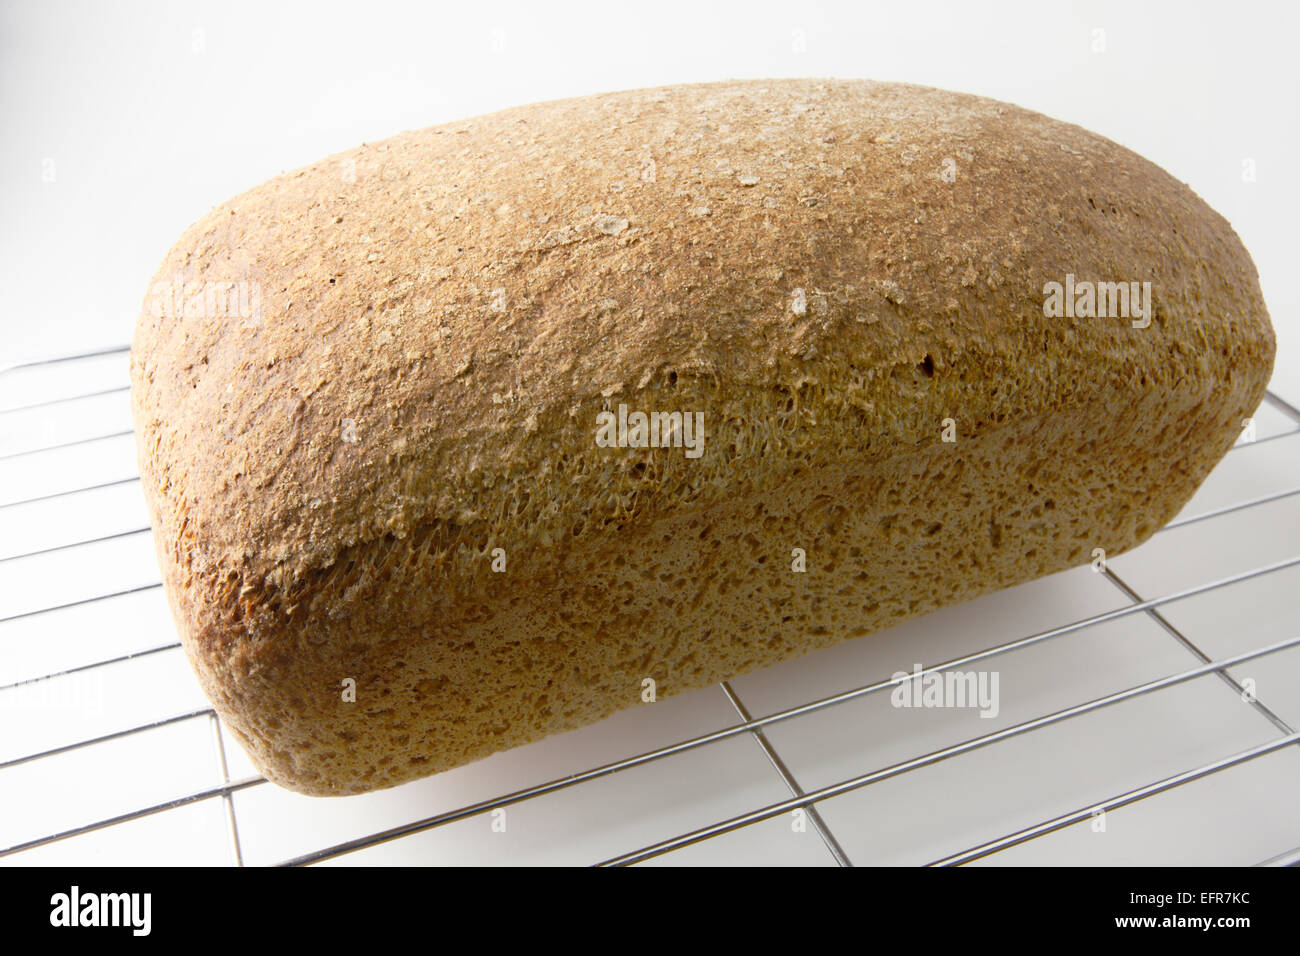 Loaf of Freshly Baked Wholemeal Bread on a Wire Cooling Rack Stock Photo